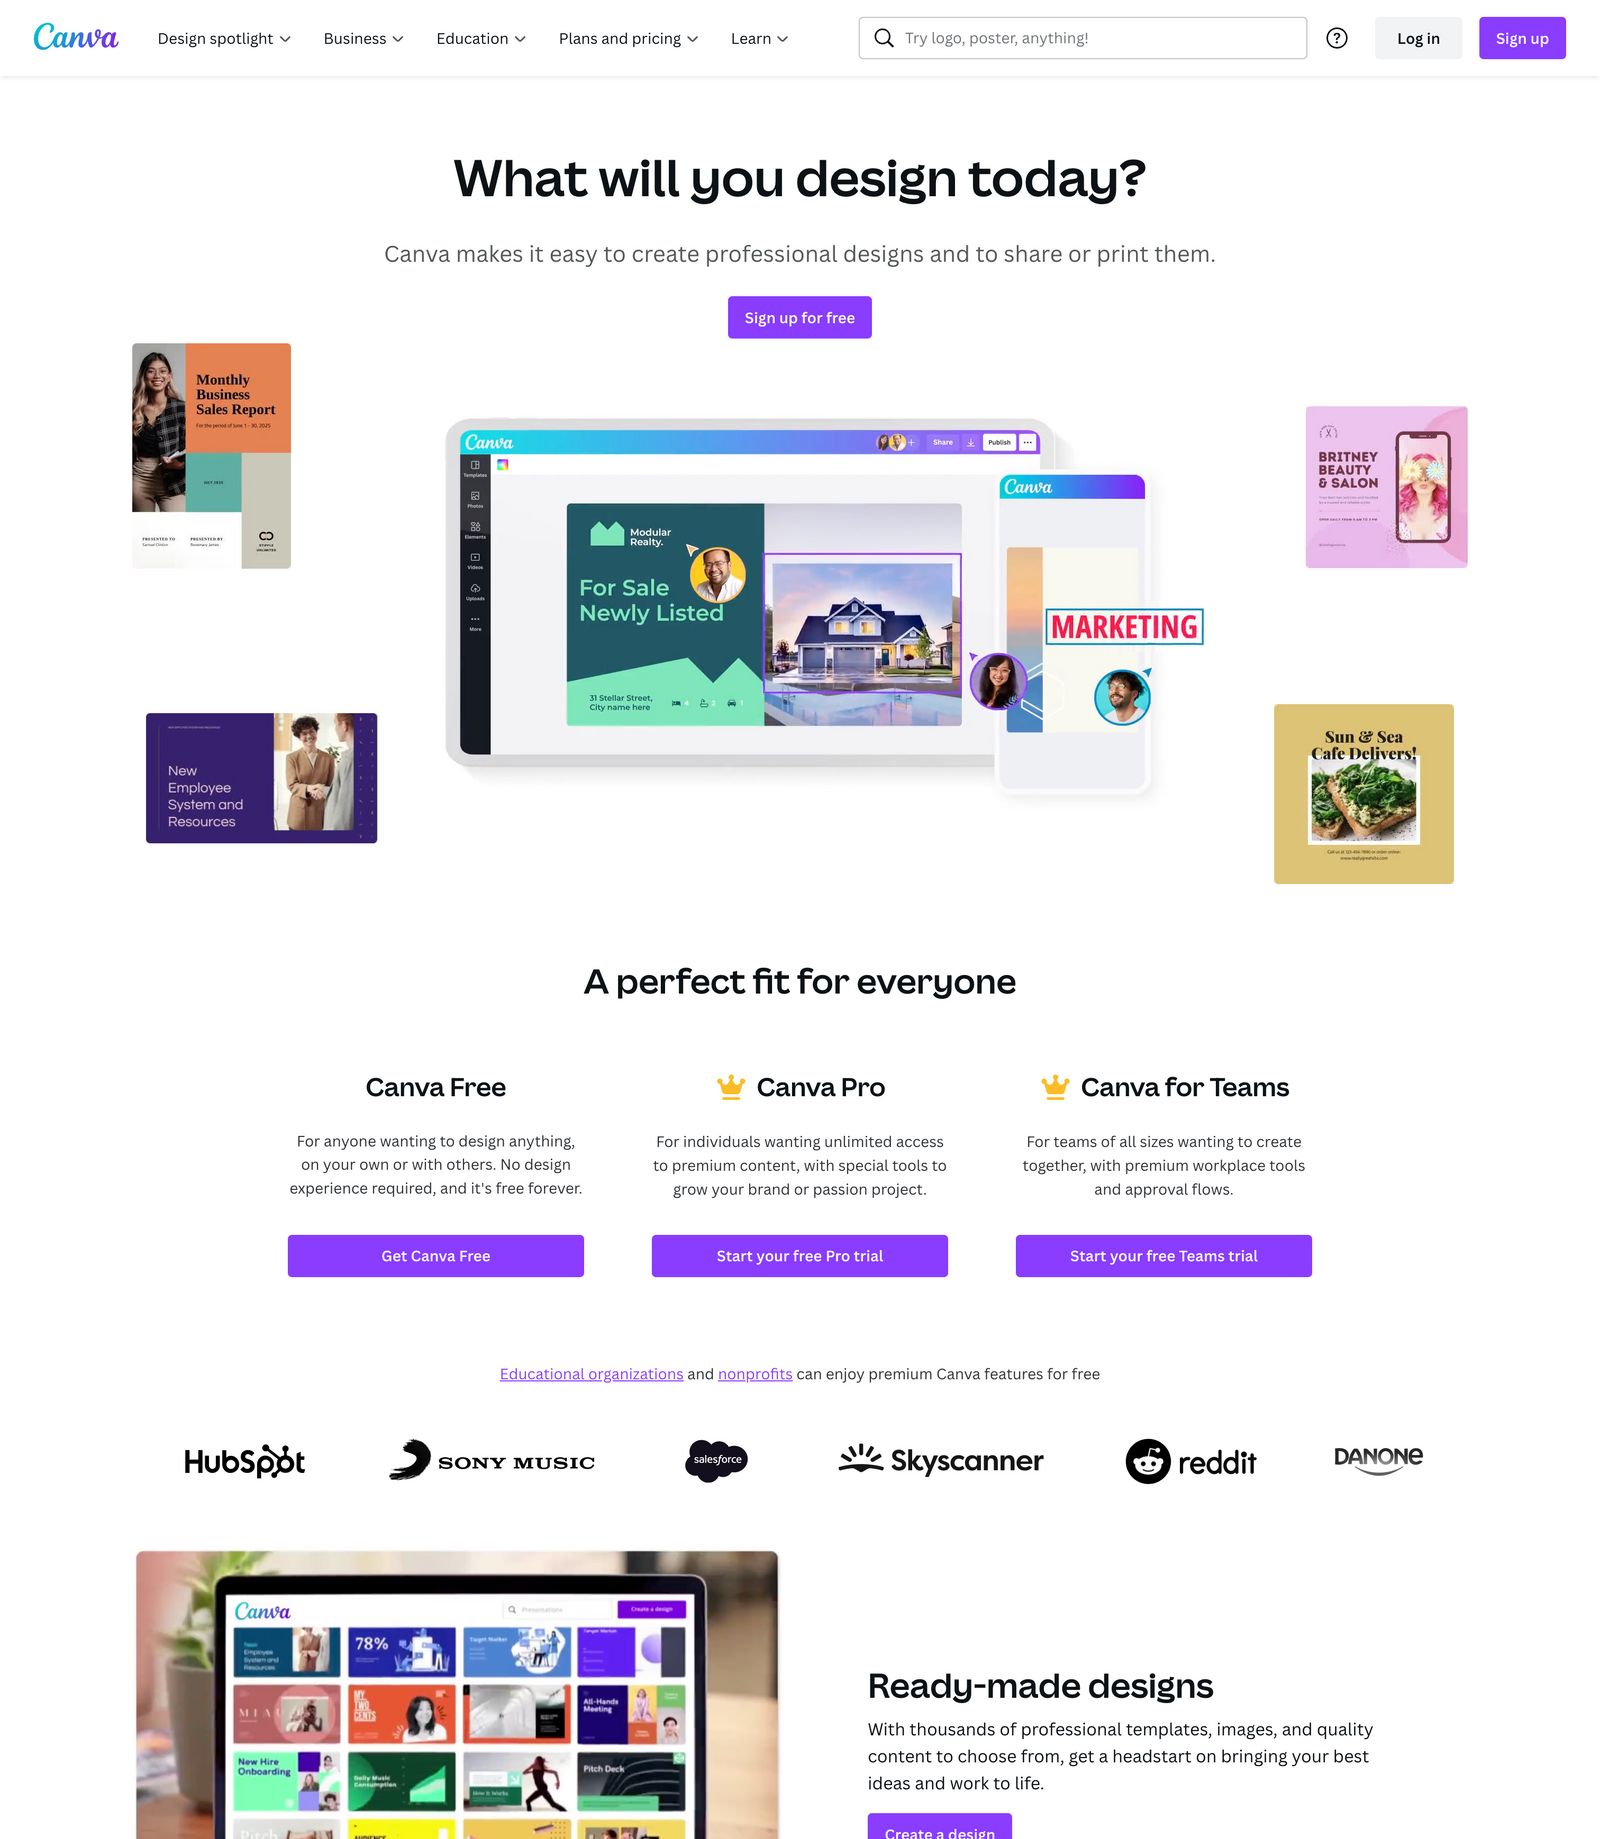 /articles/landing-page-inspiration/landing-page-design-example-14.jpg)_Saas Landing page example from Canva